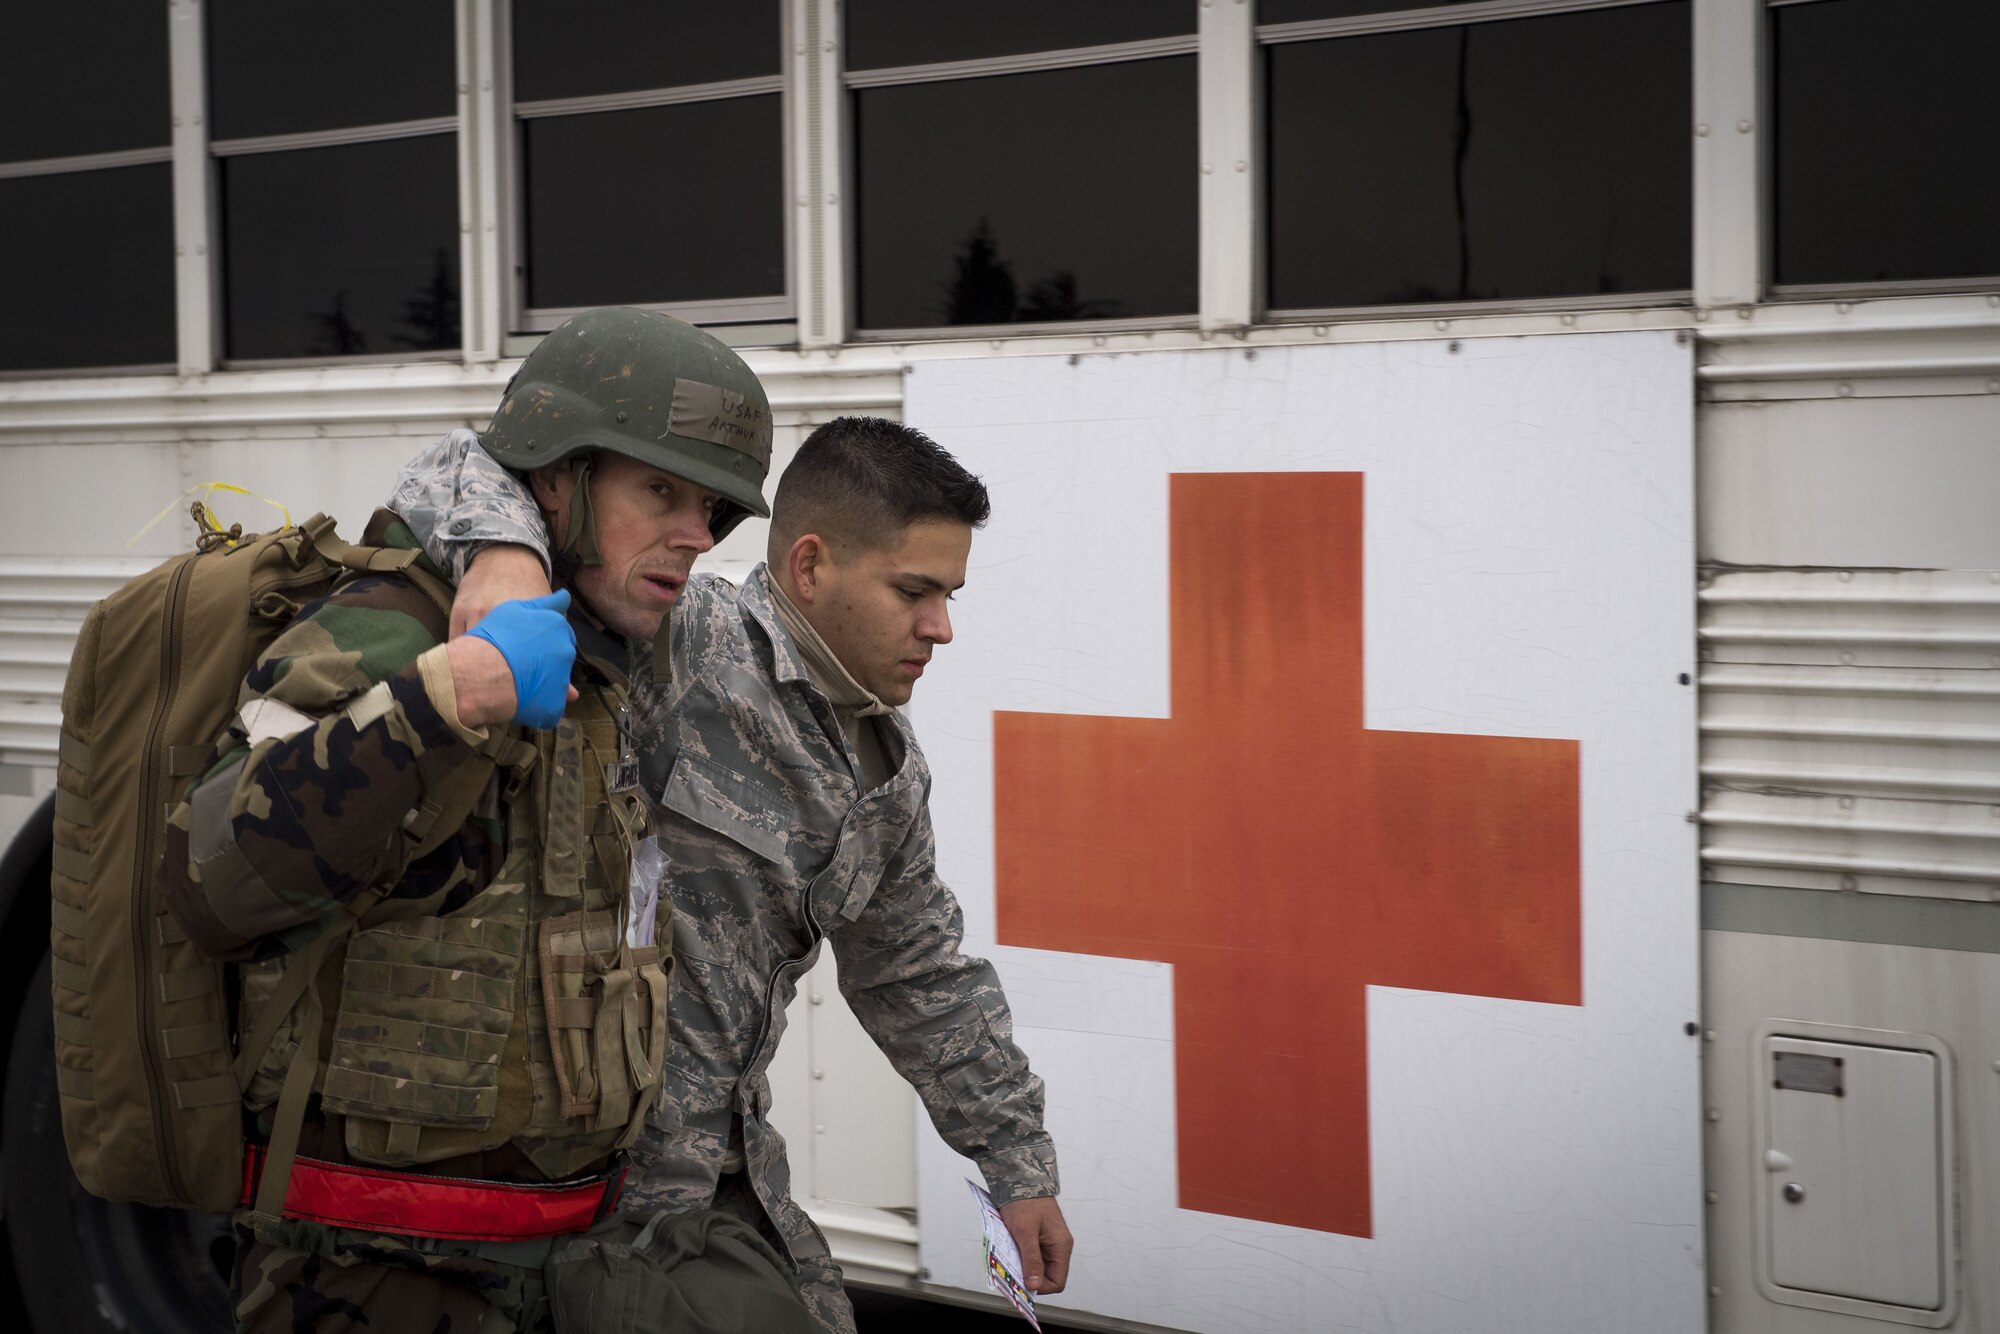 A simulated victim is carried to medical transportation by a 374th Medical Squadron on scene doctor during exercise Beverly Morning 17-08 in conjunction with exercise Vigilant Ace 18, Dec. 4, 2017, at Yokota Air Base, Japan.